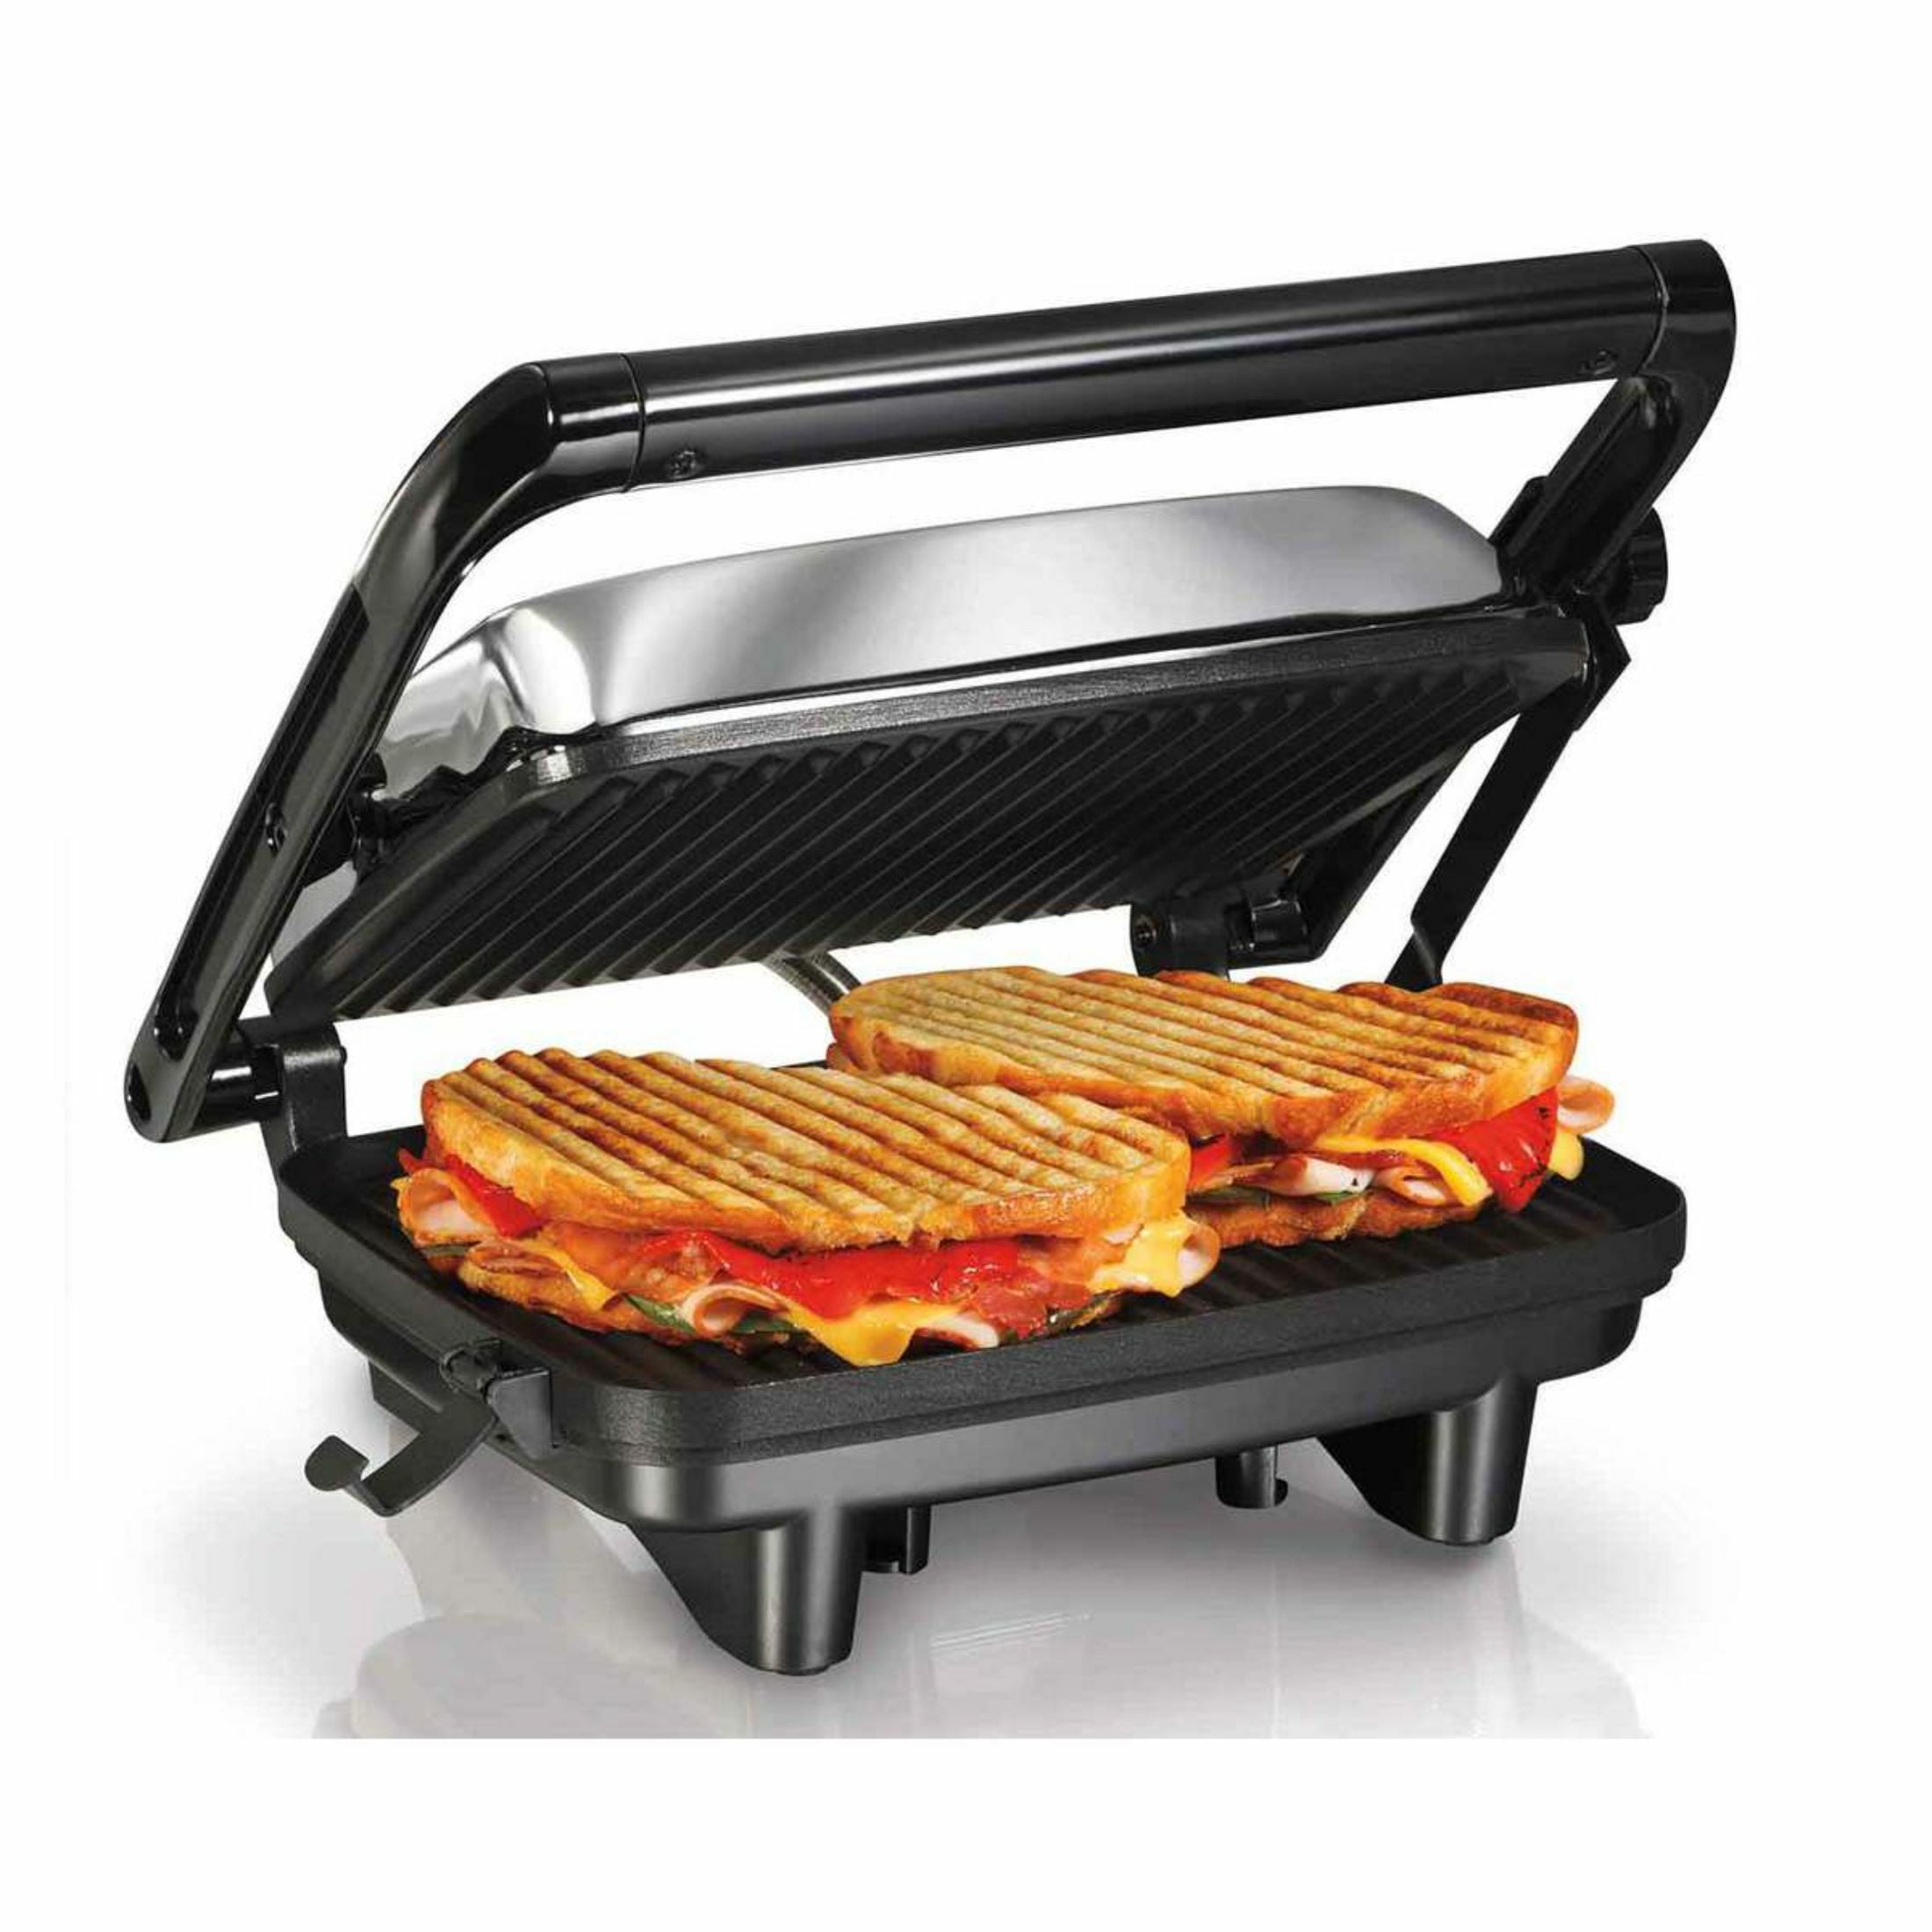 Hamilton Beach Panini Press Sandwich Maker & Electric Indoor Grill with Locking Lid, Opens 180 Degrees for Any Thickness for Quesadillas, Burgers 